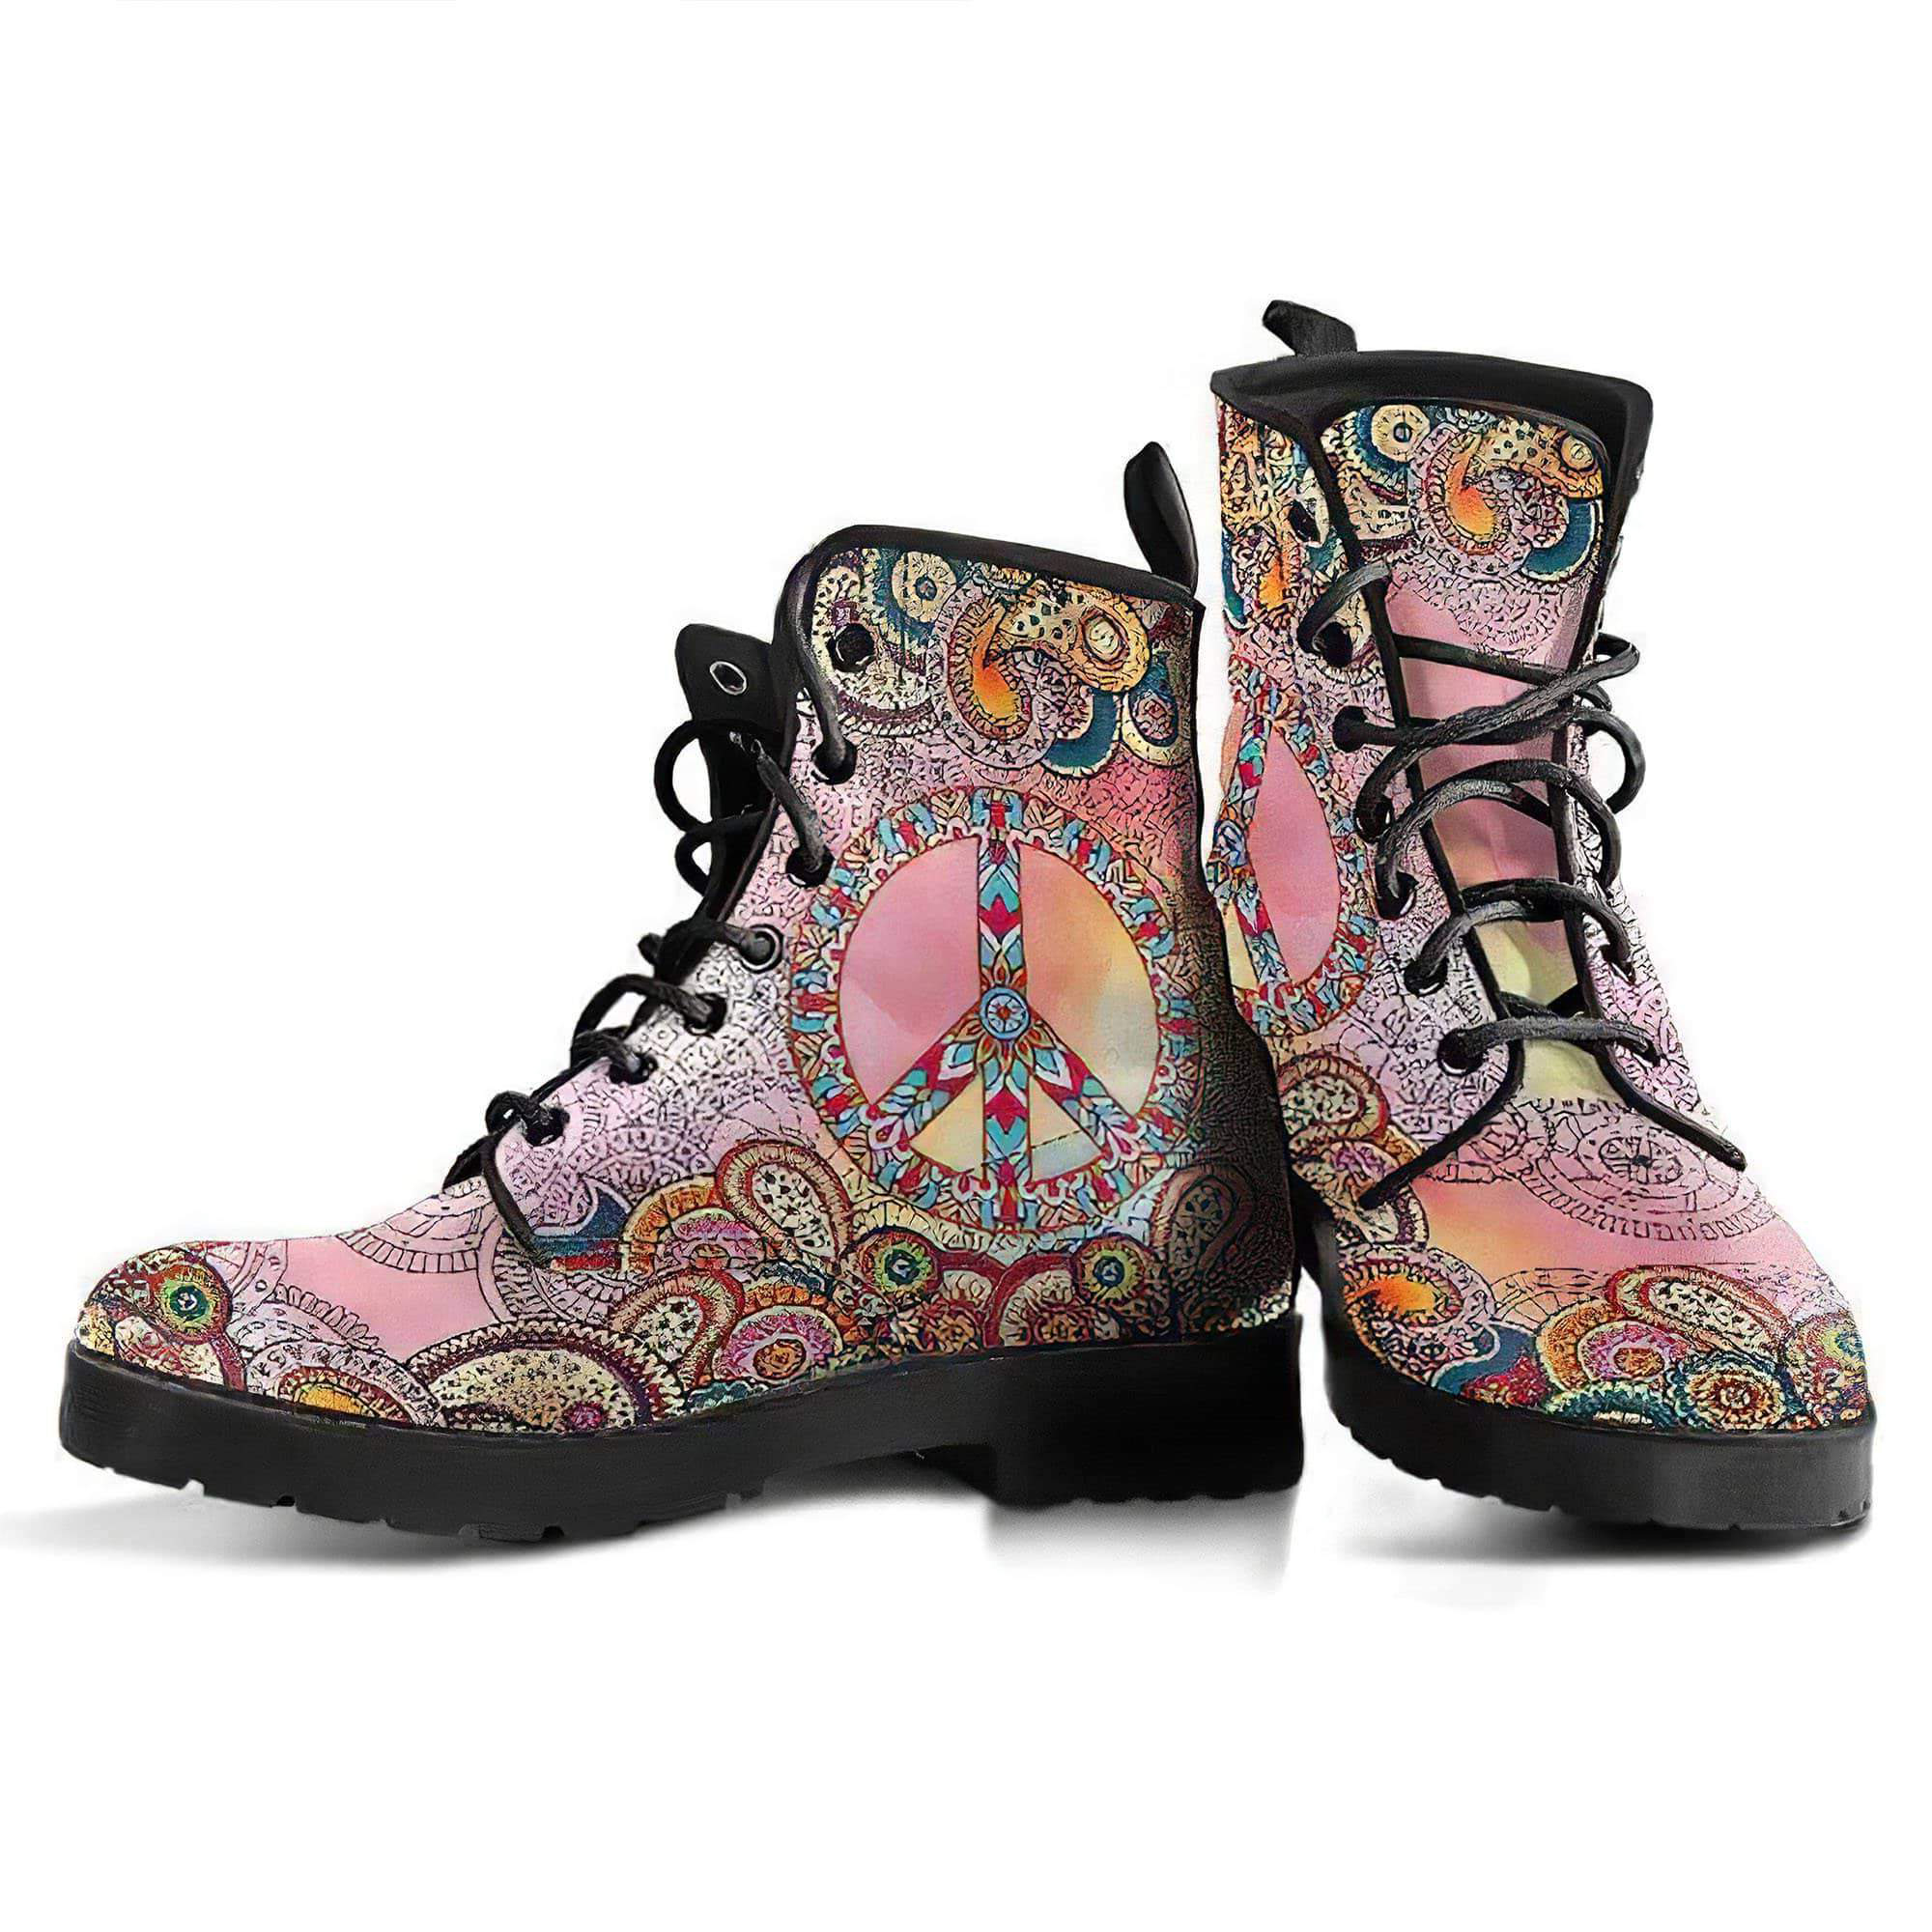 watercolor-paisley-mandala-2-handcrafted-boots-women-s-leather-boots-12051975798845.jpg